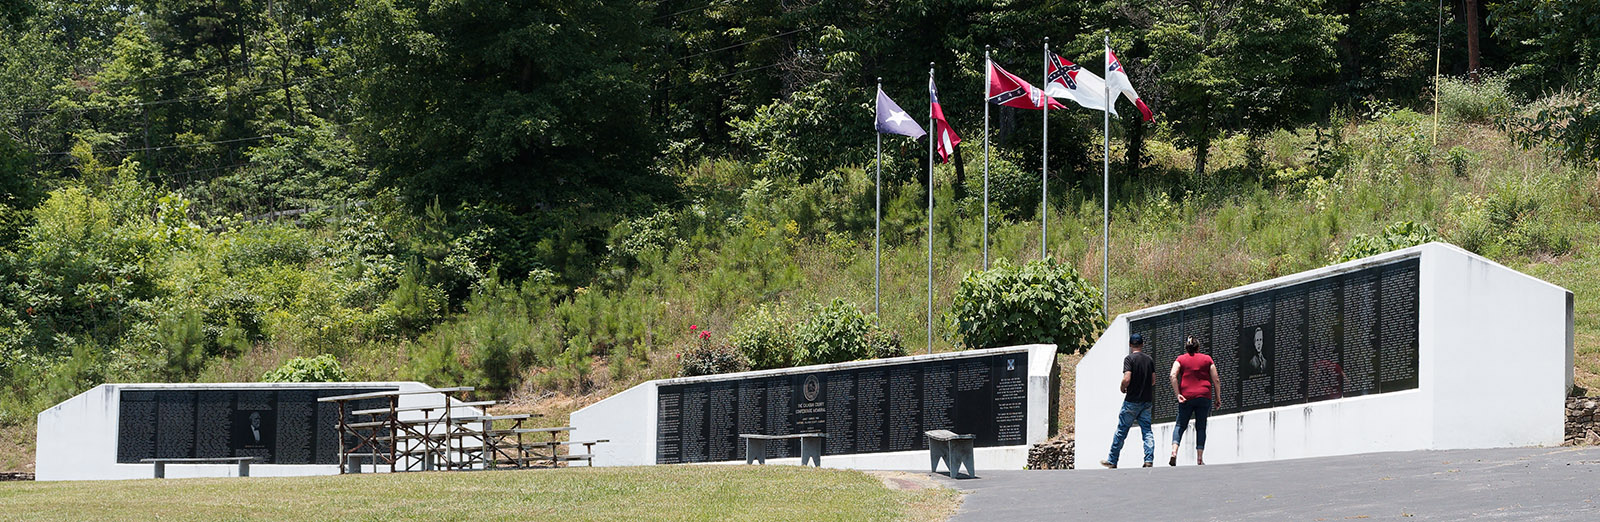 The Calhoun County Confederate Memorial at Janney Furnace Park lists county residents who died in the Civil War.